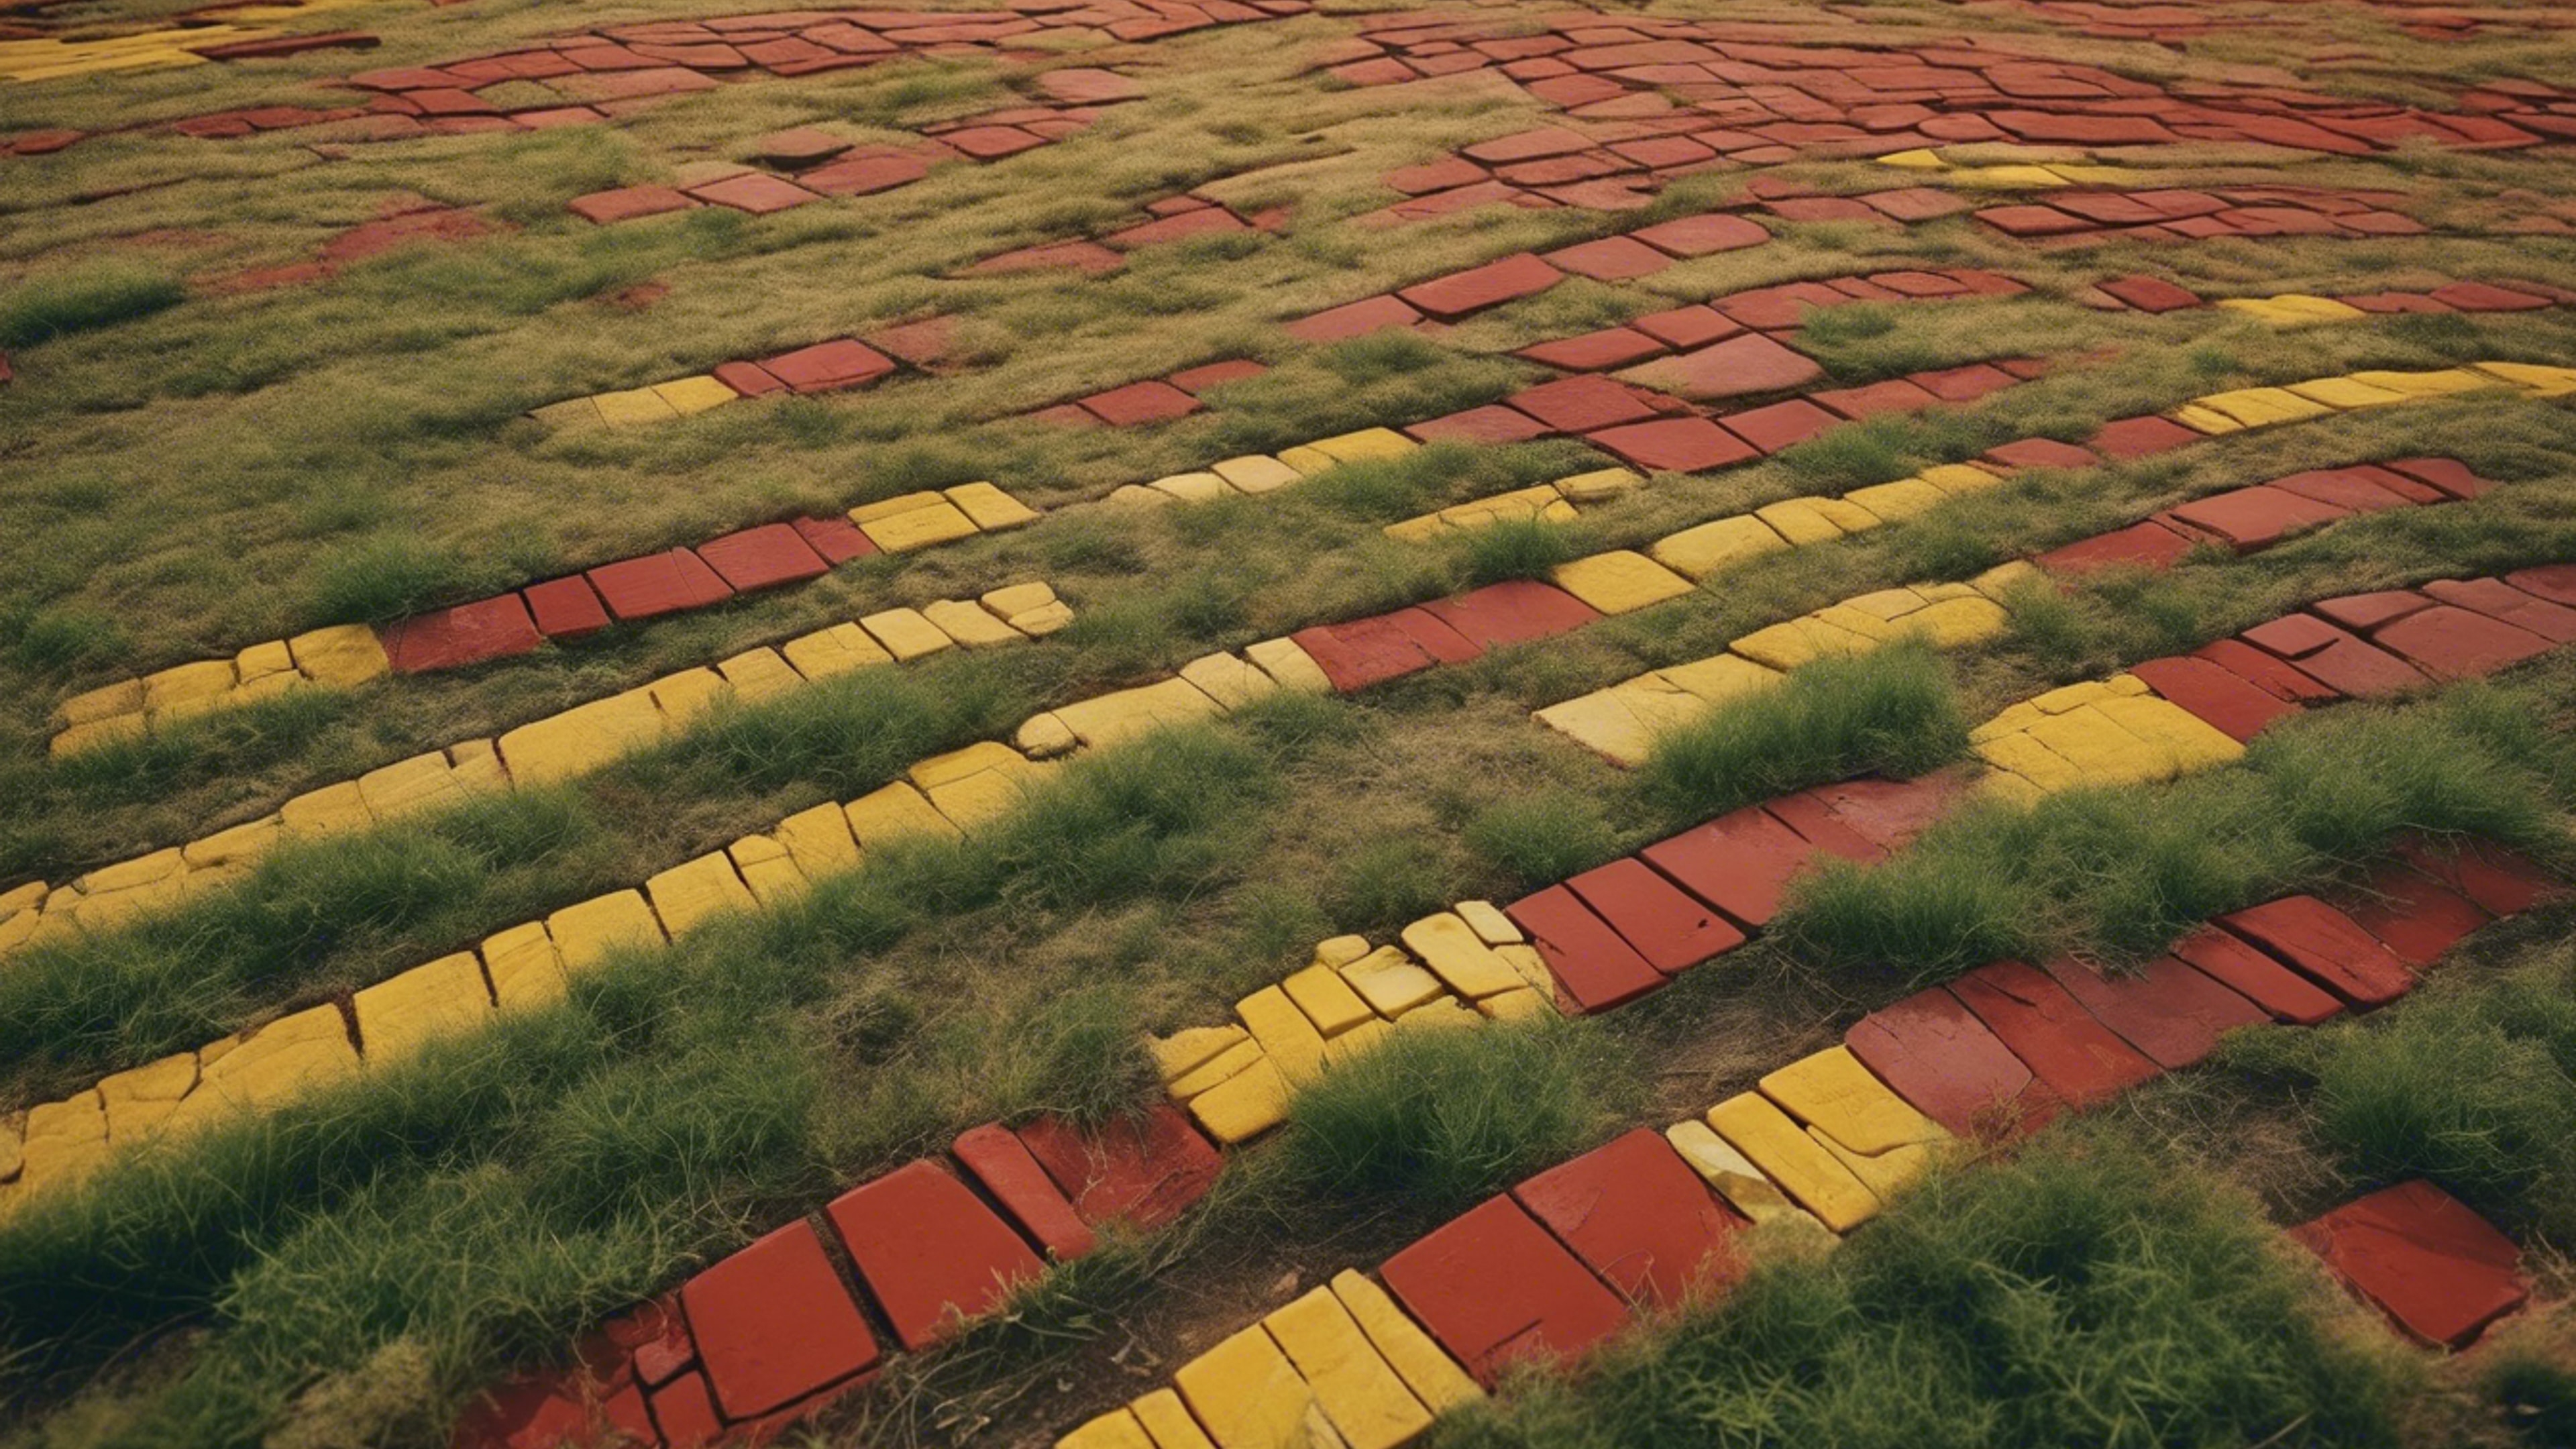 A bird's eye view of a red and yellow brick road weaving through a meadow. Tapet[b665fbc055ed4704af98]